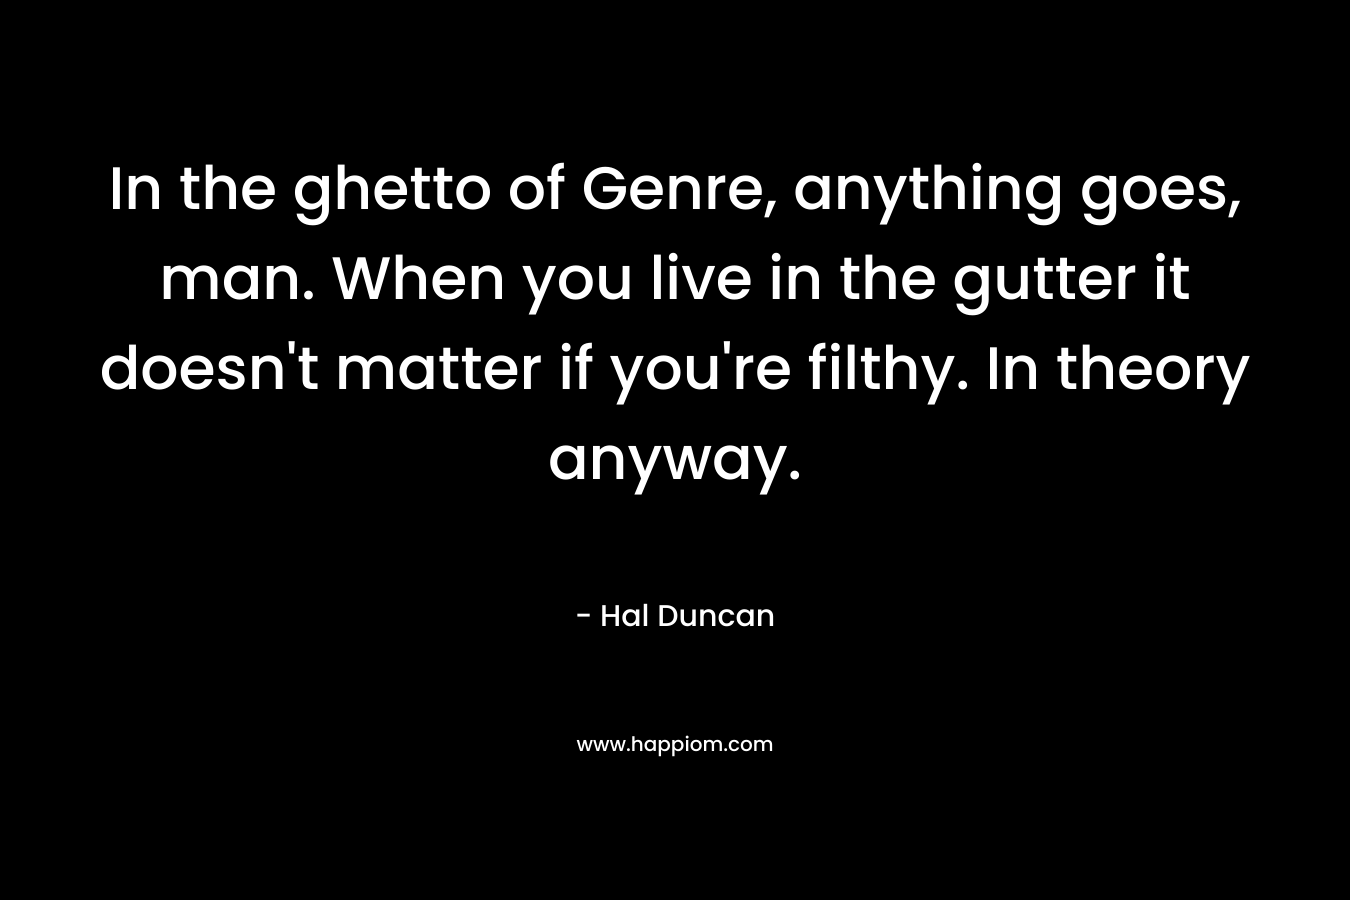 In the ghetto of Genre, anything goes, man. When you live in the gutter it doesn't matter if you're filthy. In theory anyway.